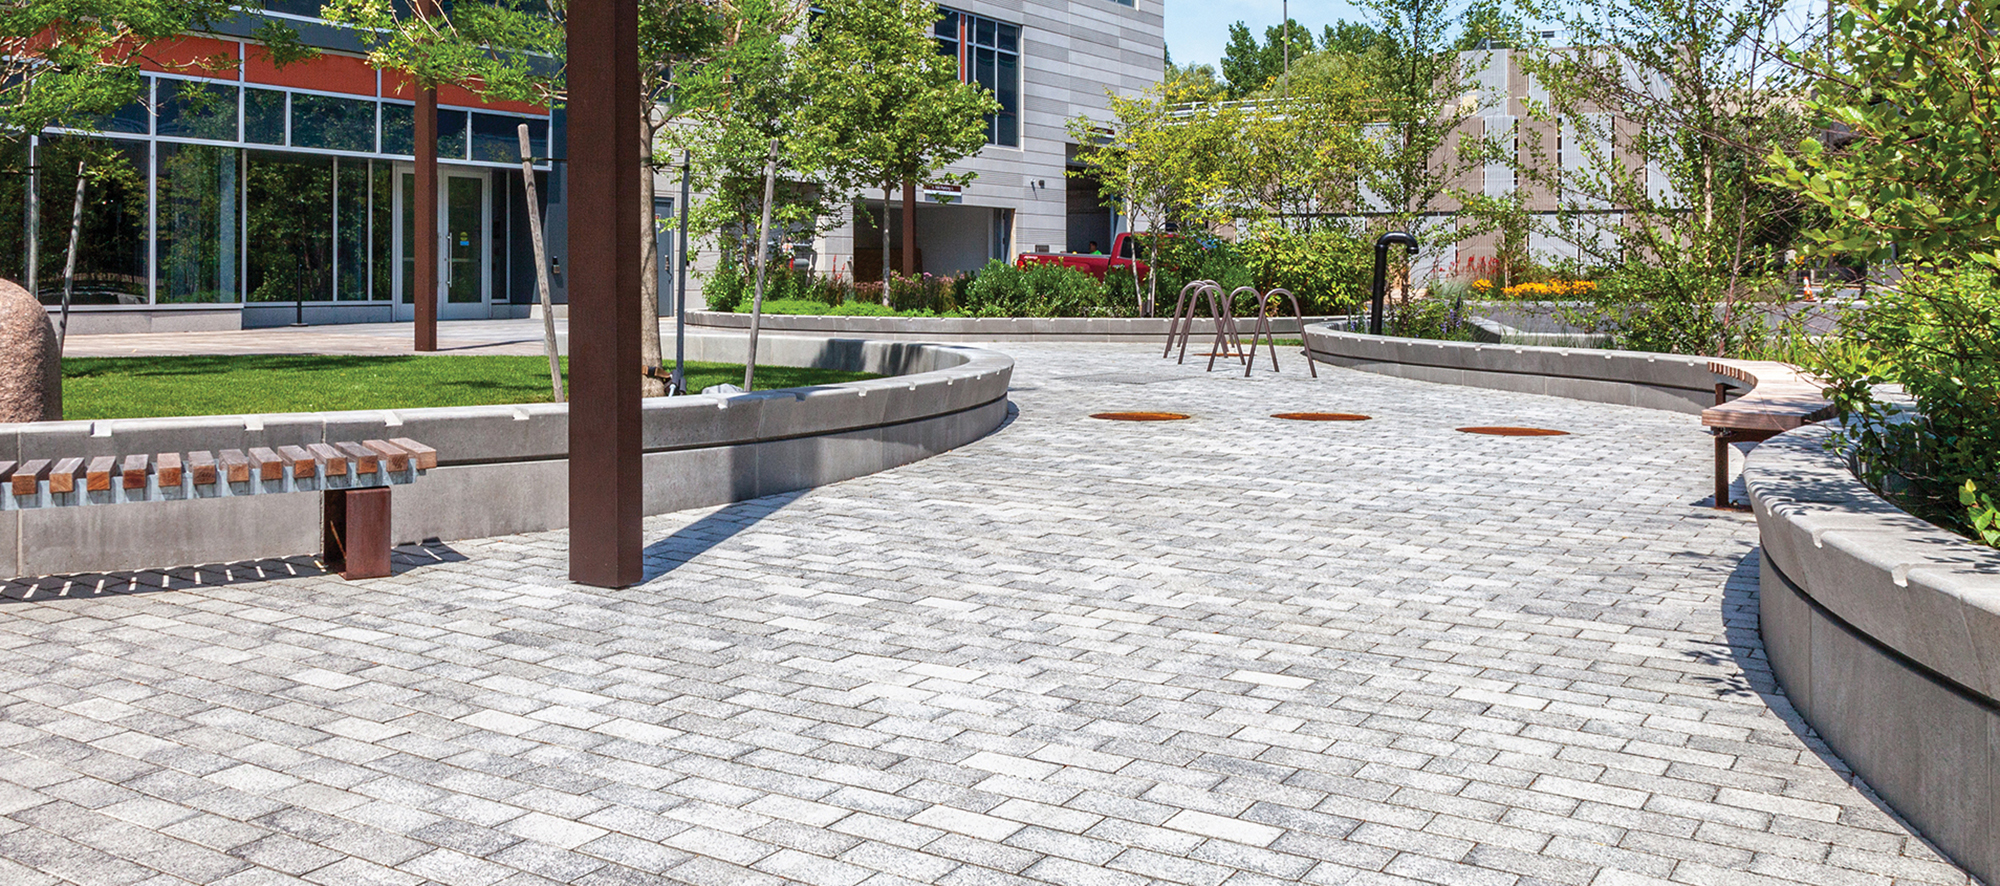 A rectangular building has a pedestrian area with Unilock Eco-Priora pavers in grey tones, with bike racks, benches, and landscaping.